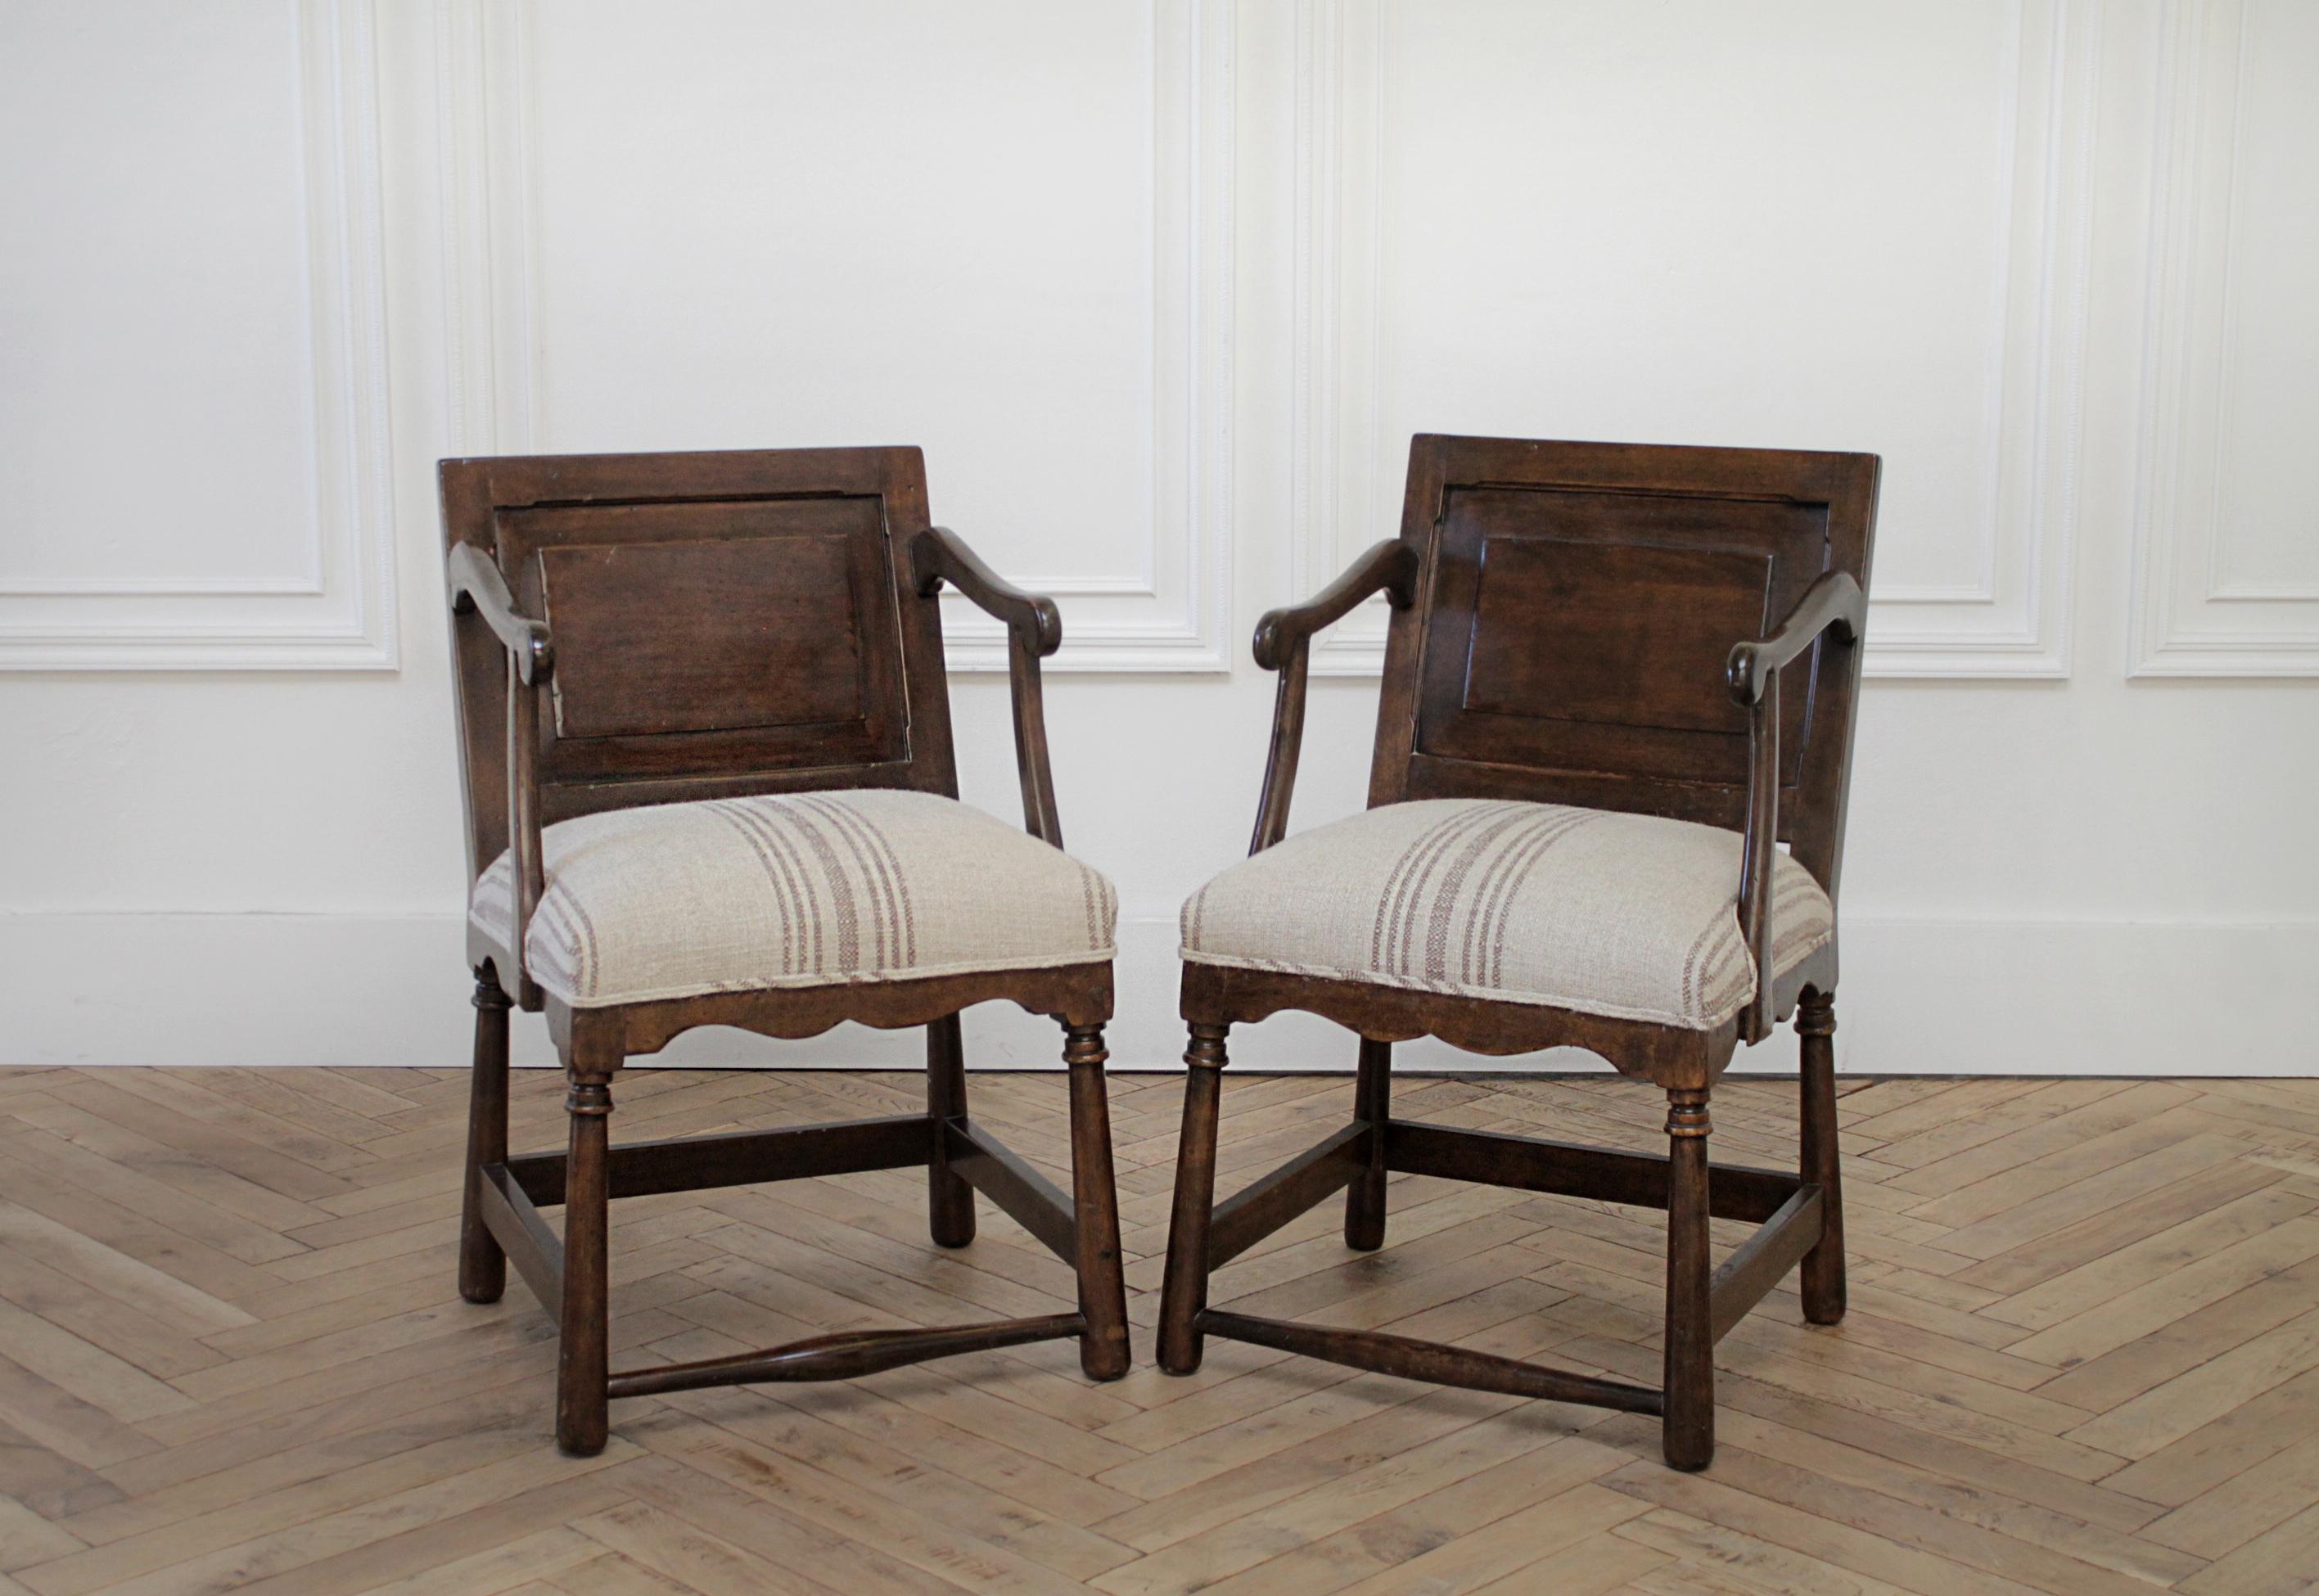 Pair of fruitwood carved and upholstered armchairs
Dark colored wood with natural patina, upholstered in a light natural colored grain sack fabric with brown stripe.
Measures: 19.5